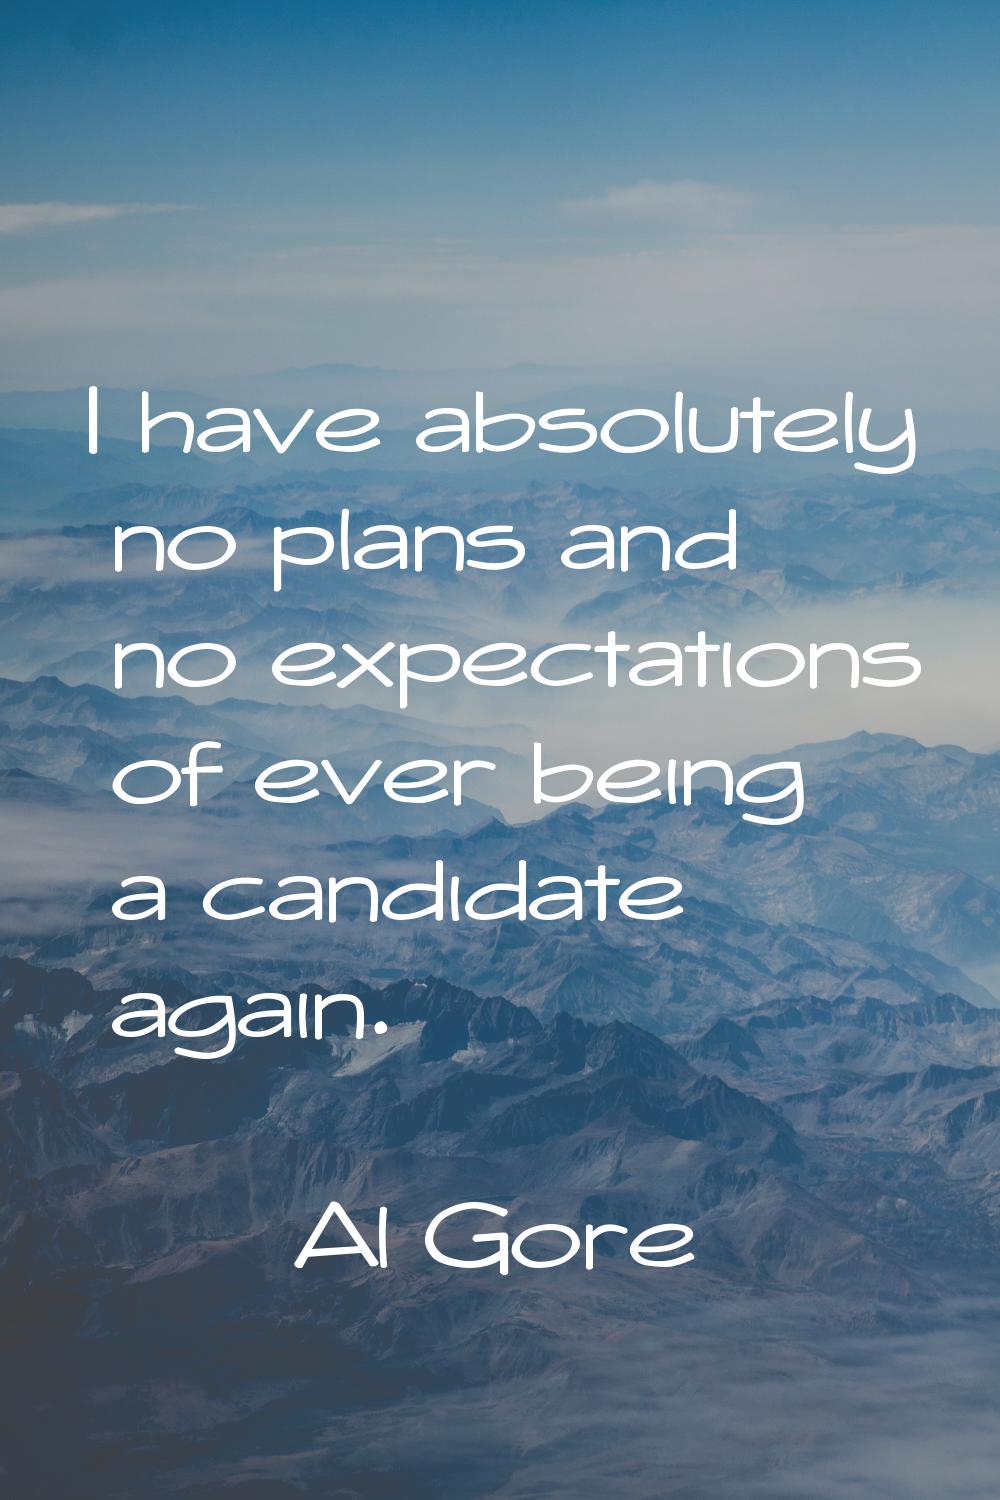 I have absolutely no plans and no expectations of ever being a candidate again.